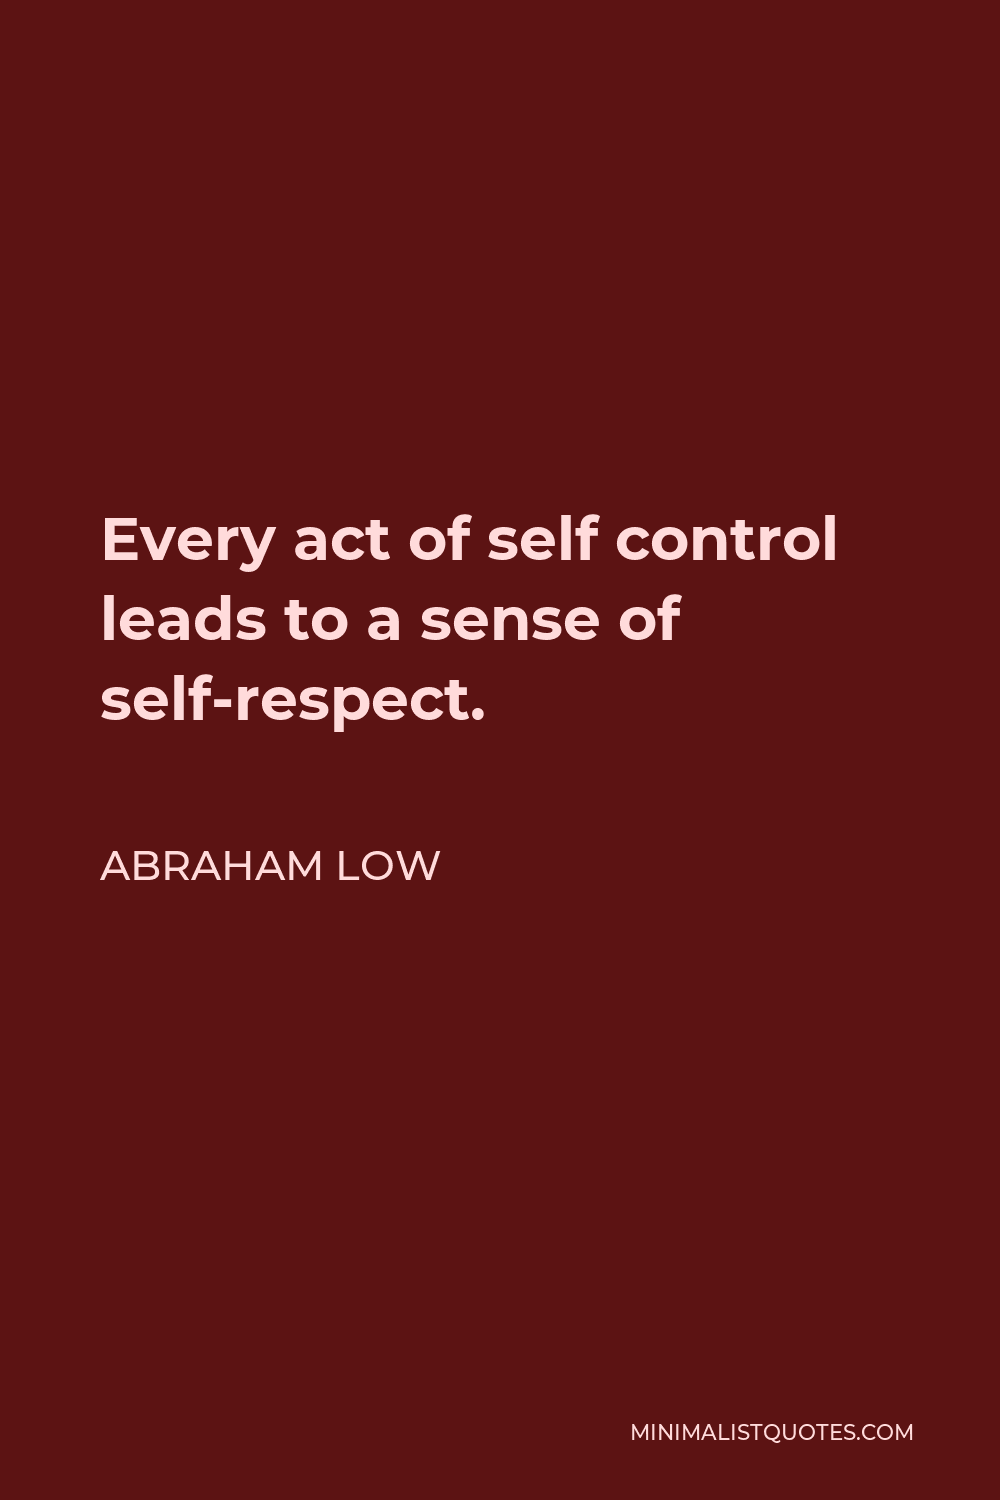 Abraham Low Quote - Every act of self control leads to a sense of self-respect.